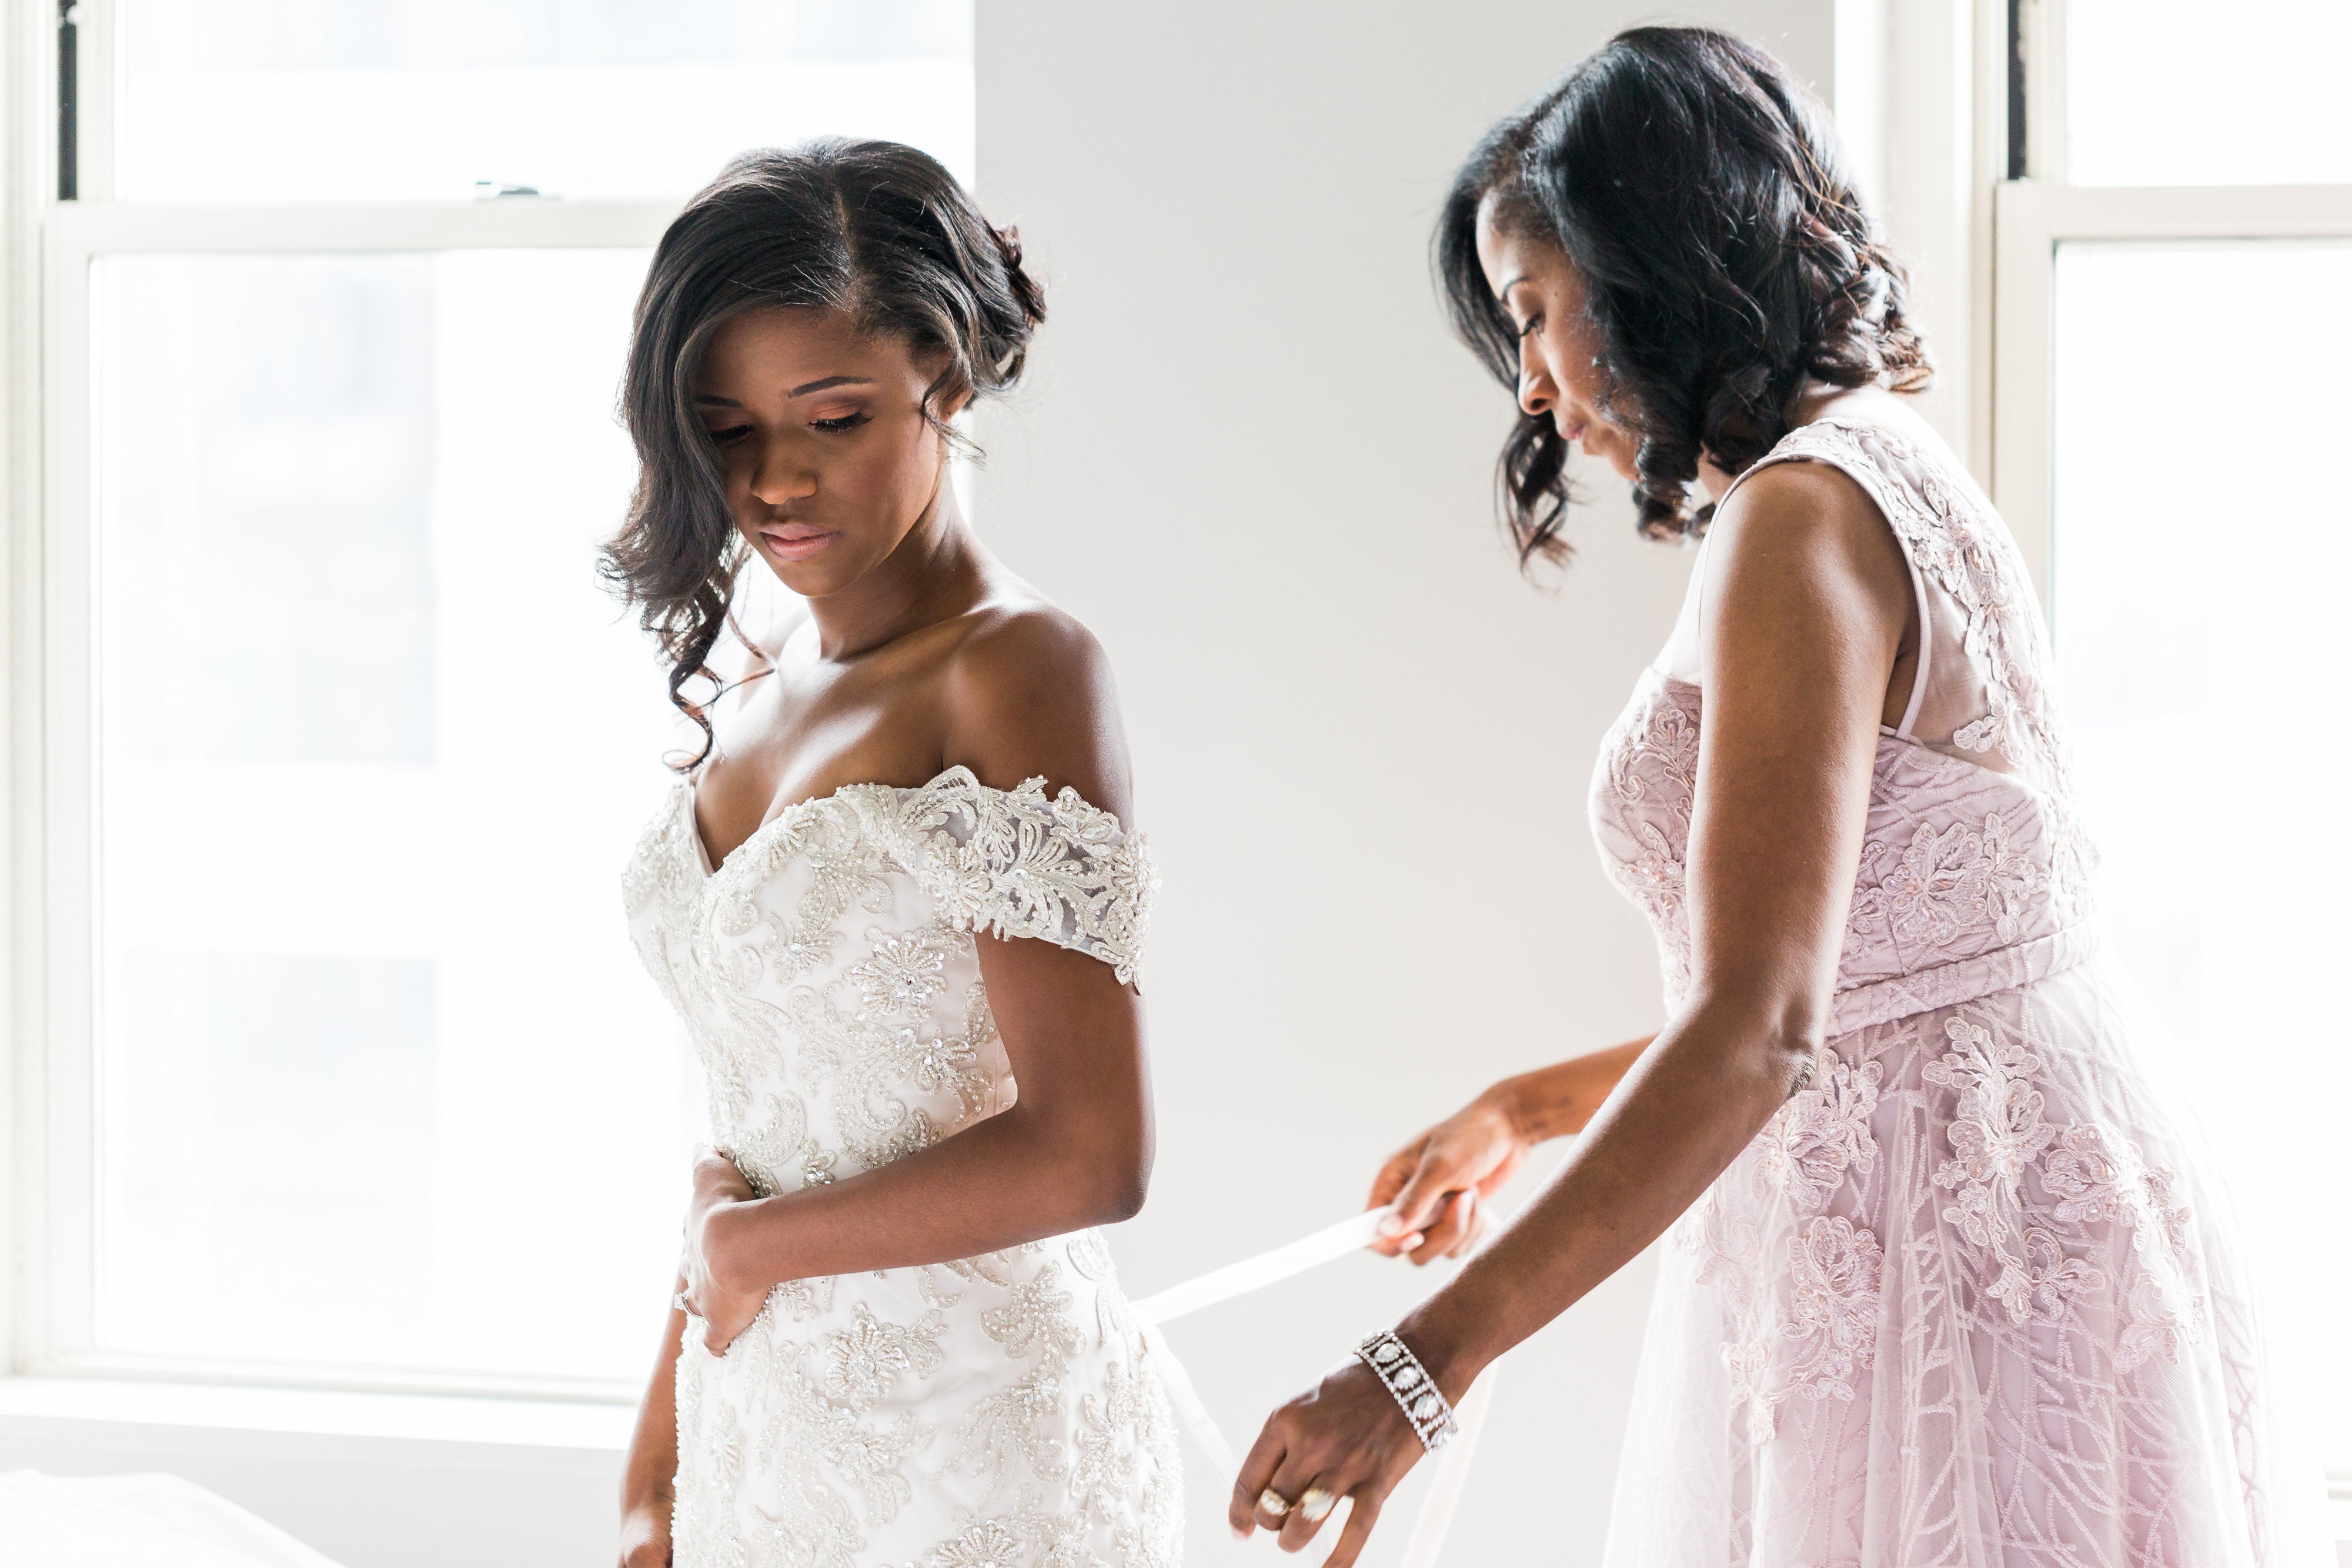 Bridal Bliss: Alexis And Rashod's Romantic Wedding Will Take Your Breath Away
